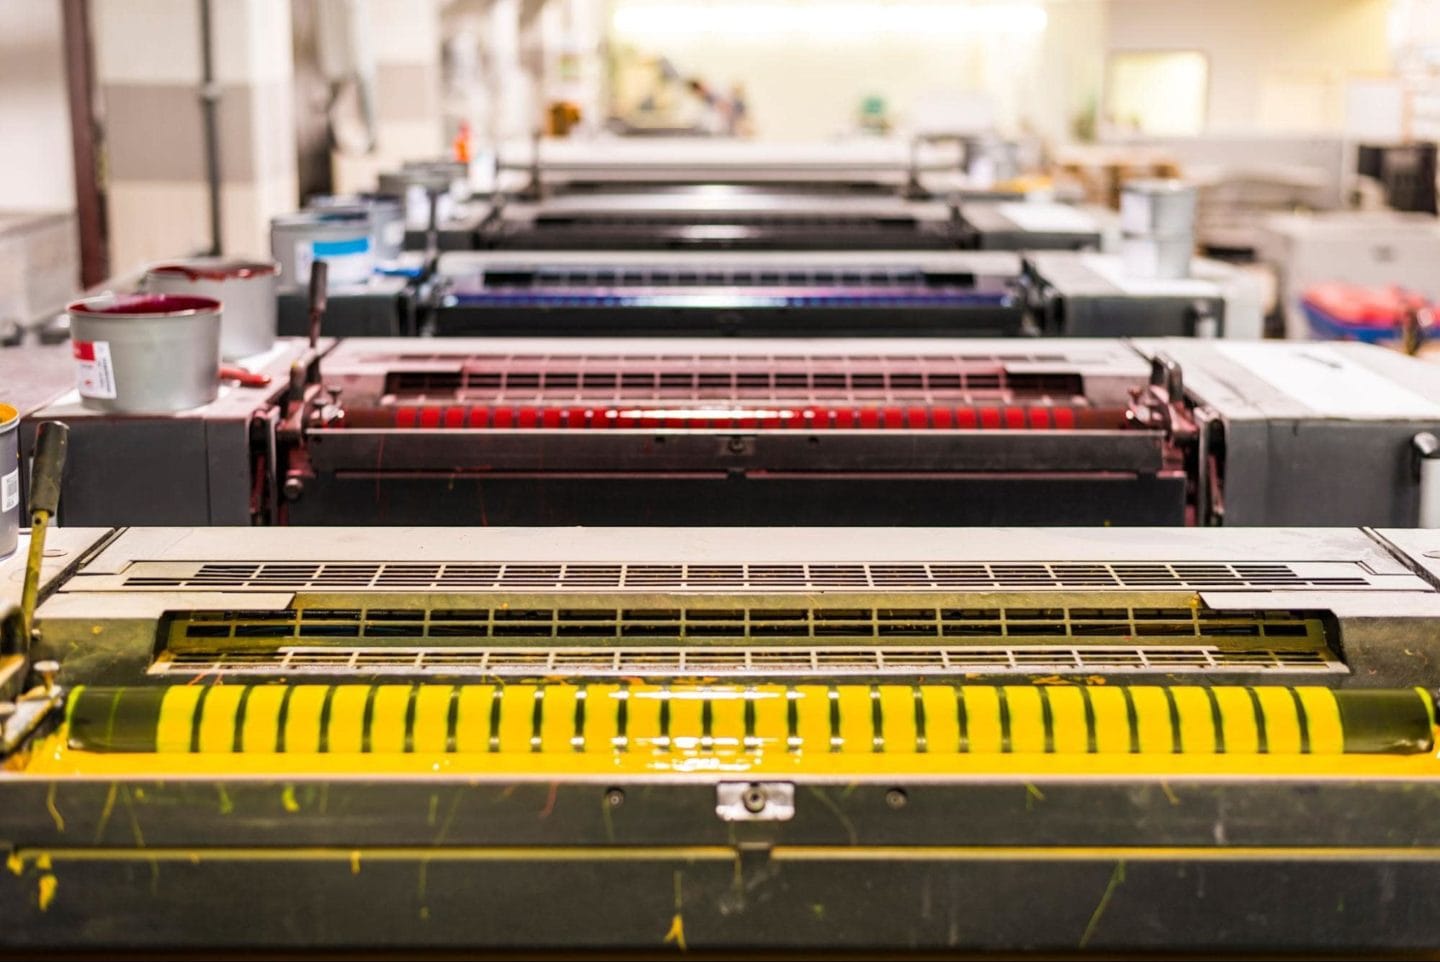 A picture of three offset printers, with yellow, red, and blue aesthetics.